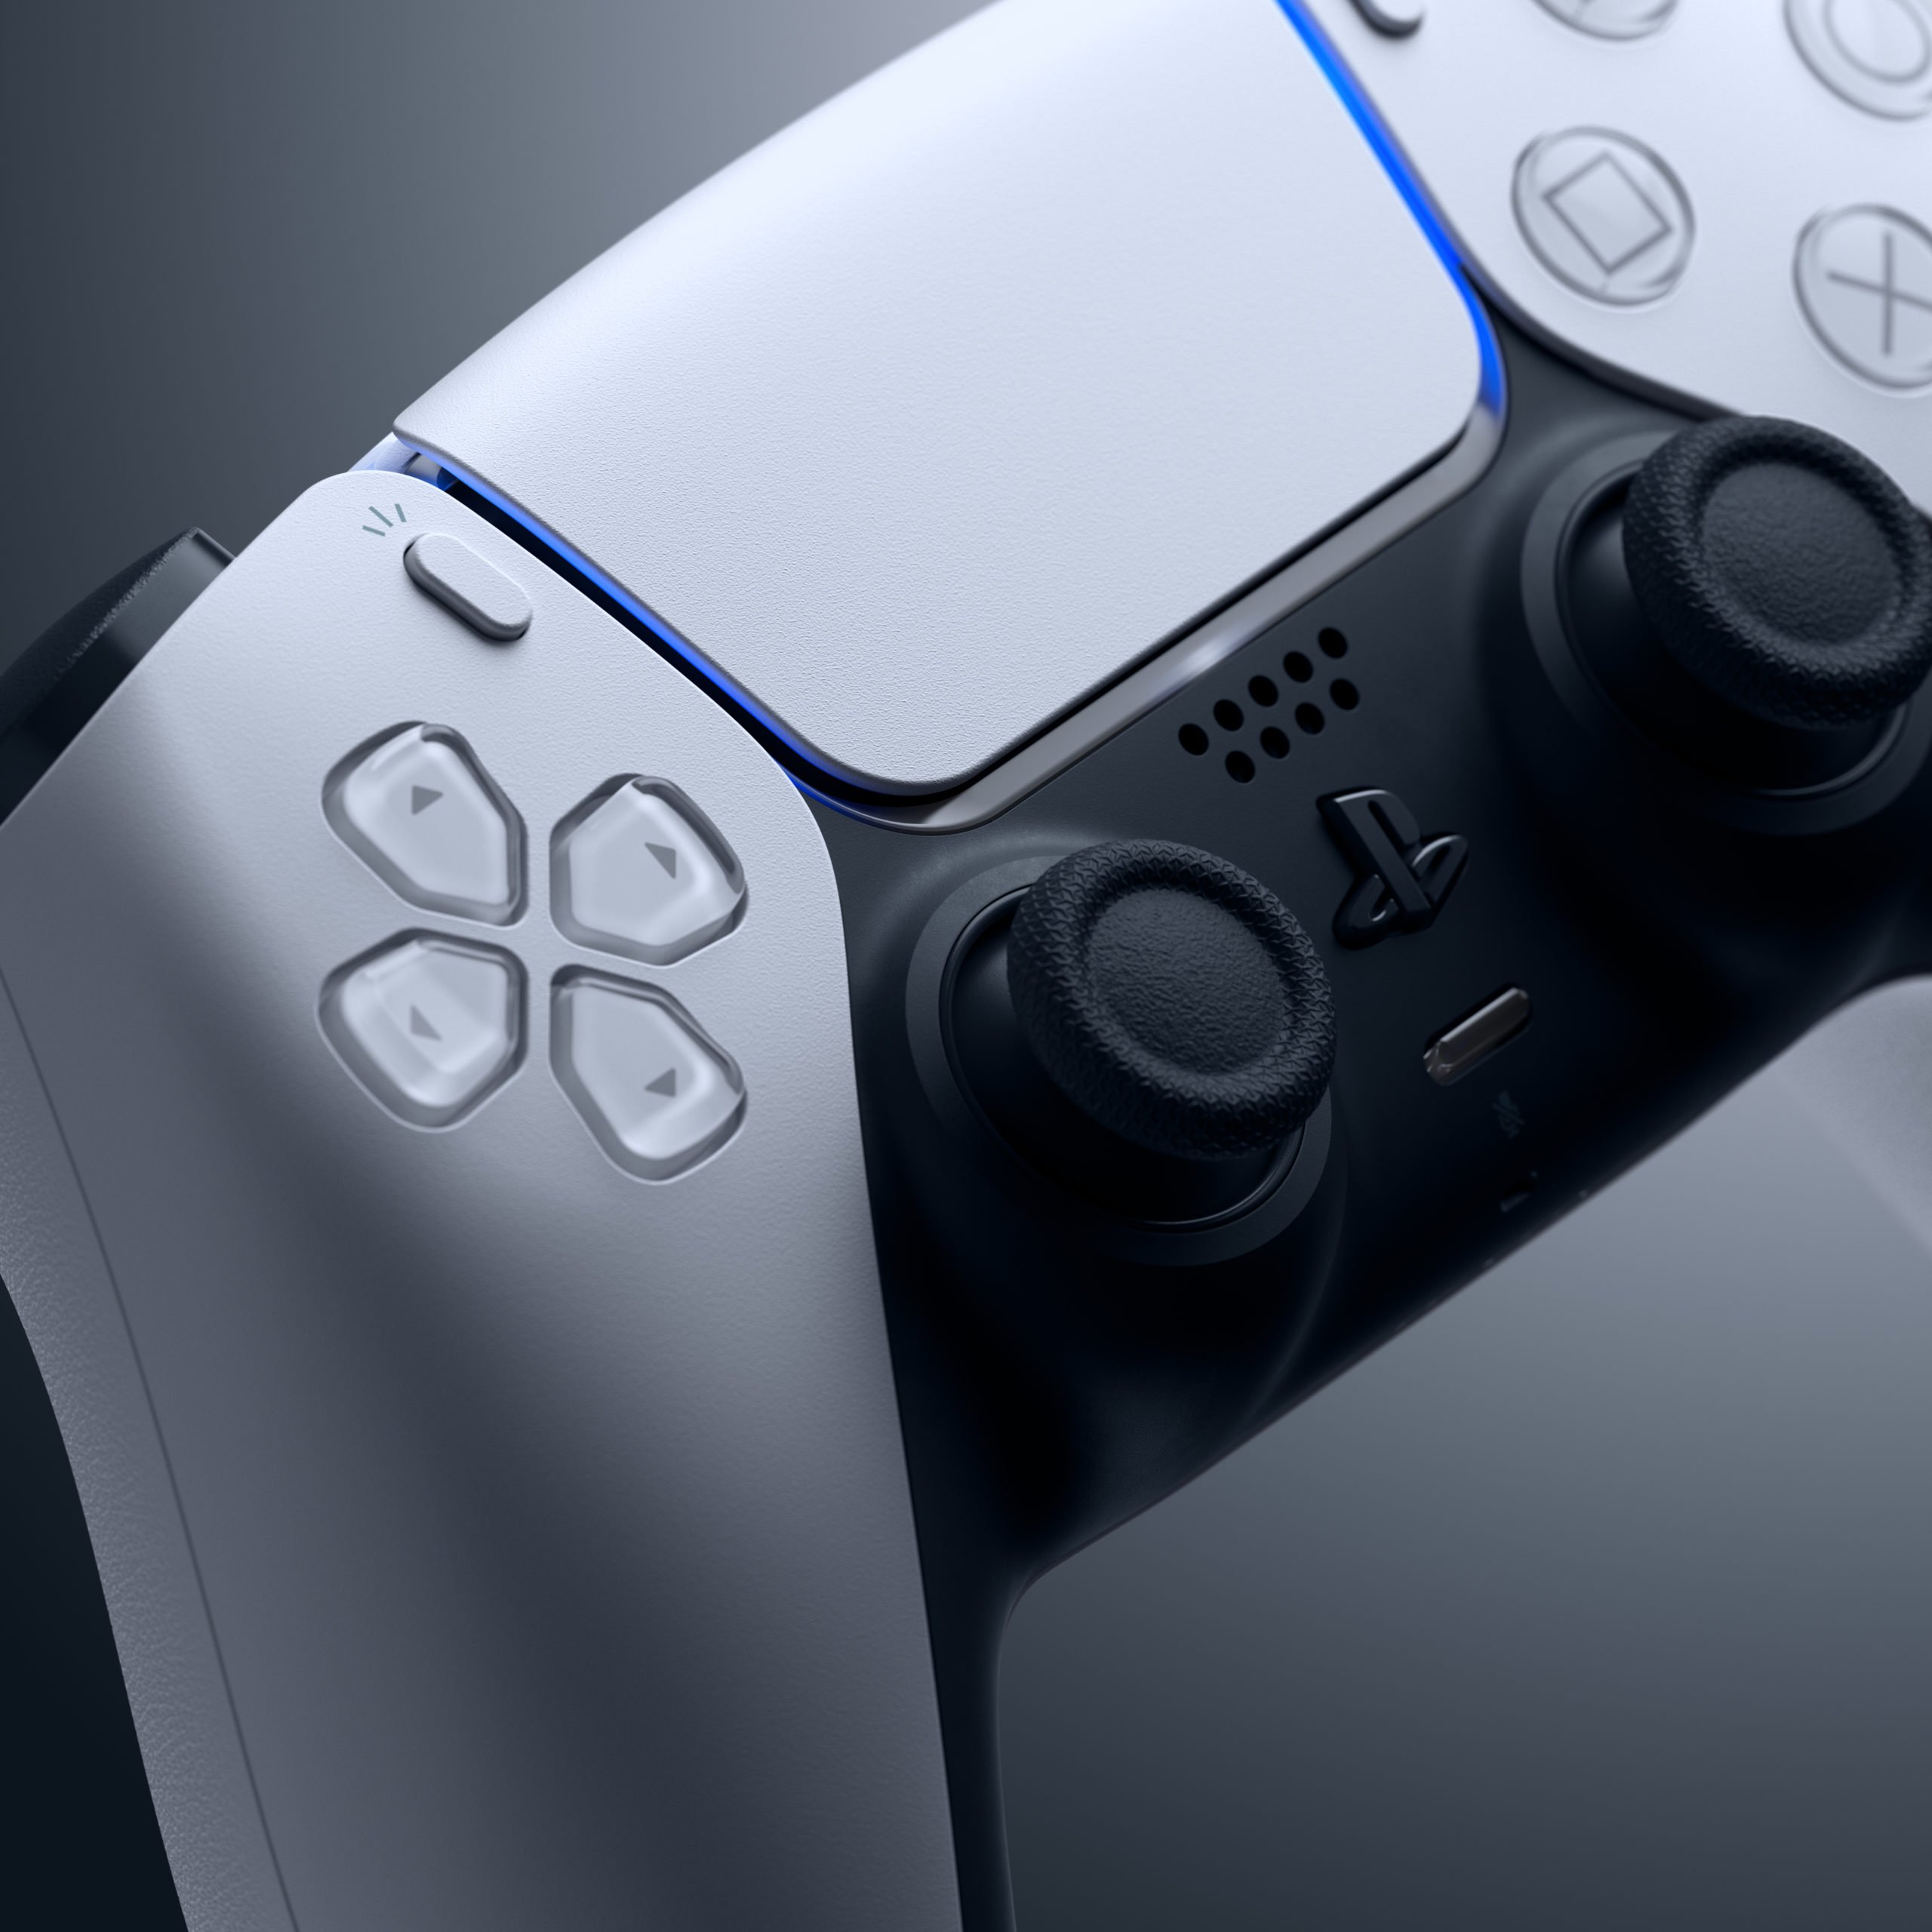 PS5 update seemingly targets Cronus Zen devices - The Tech Game